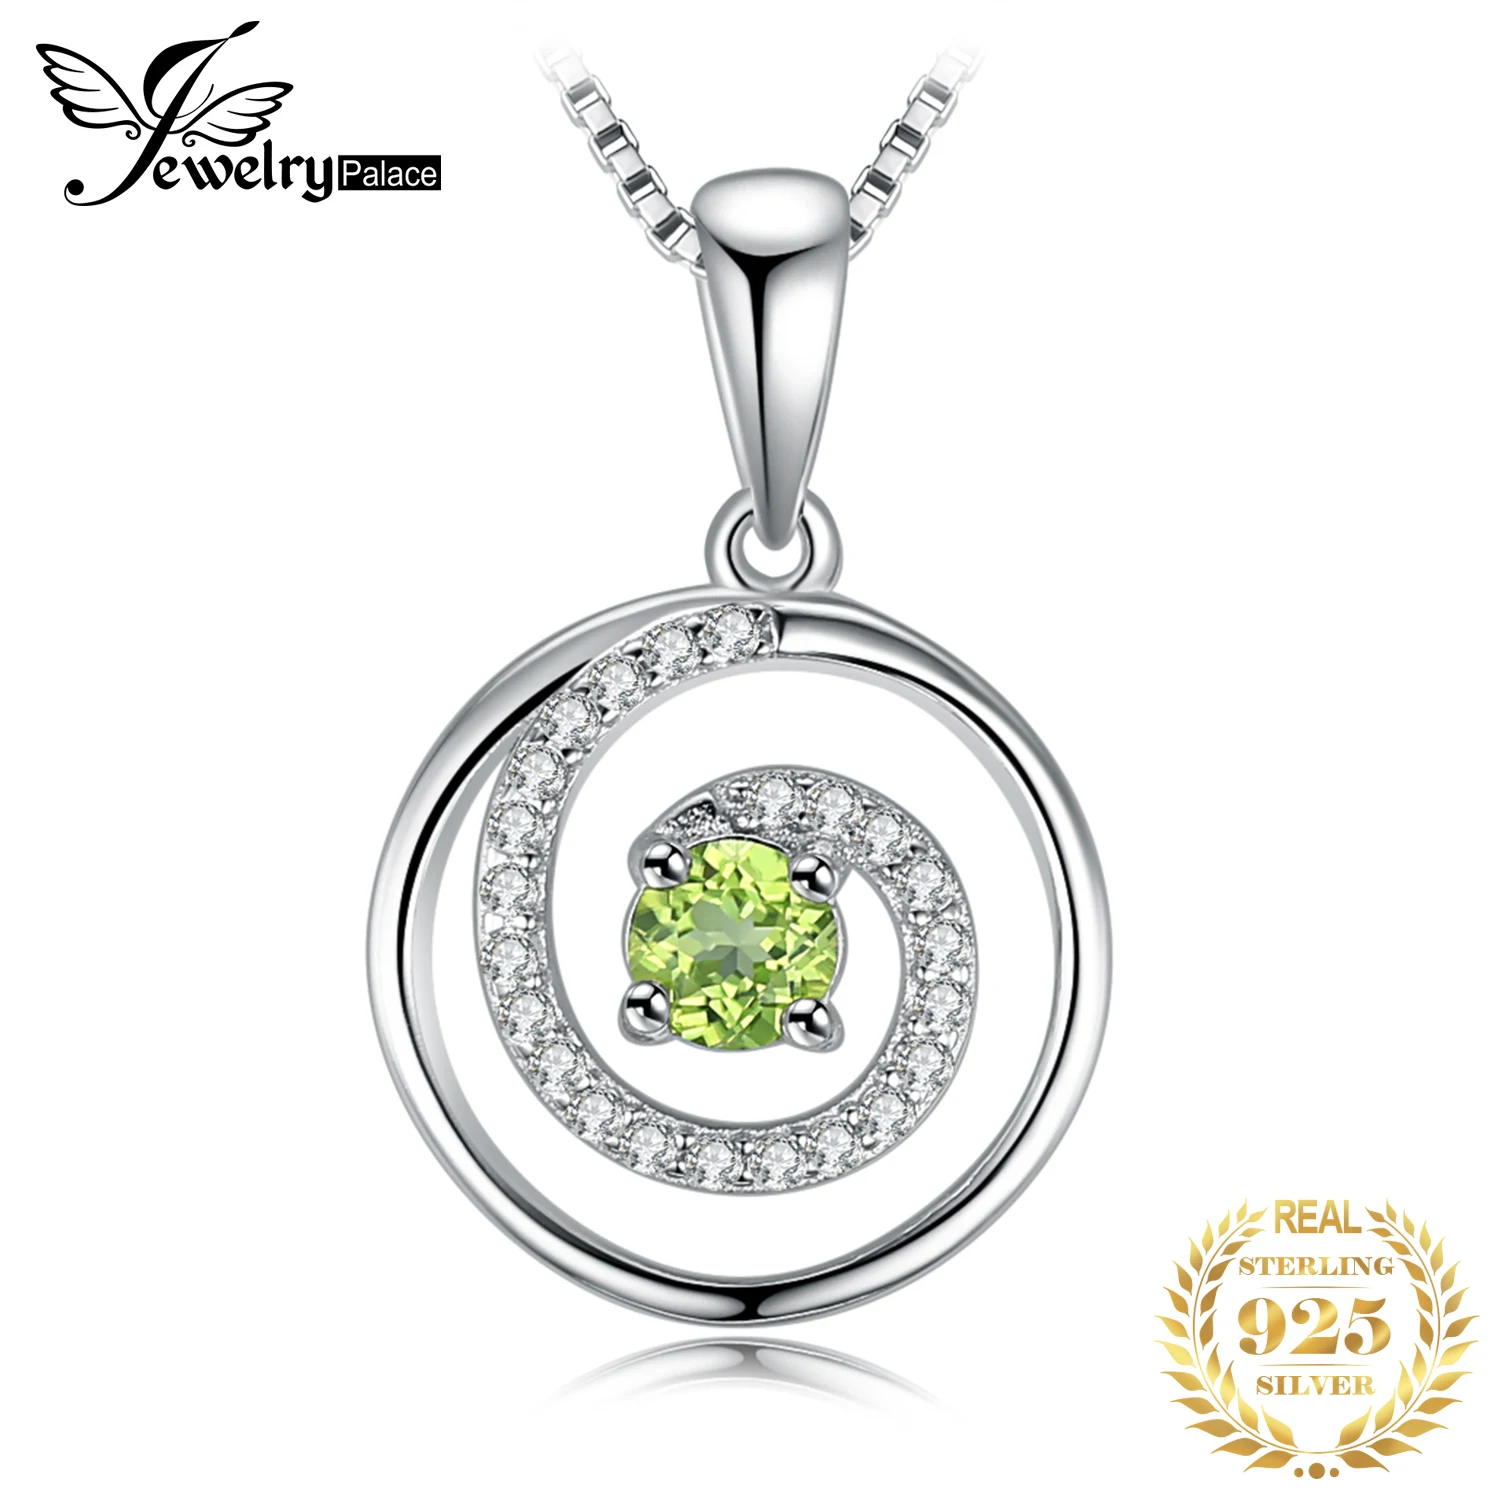 925 Sterling Silver Swirl Round Pendant Necklace Chain Jewellery Ladies Gifts UK 